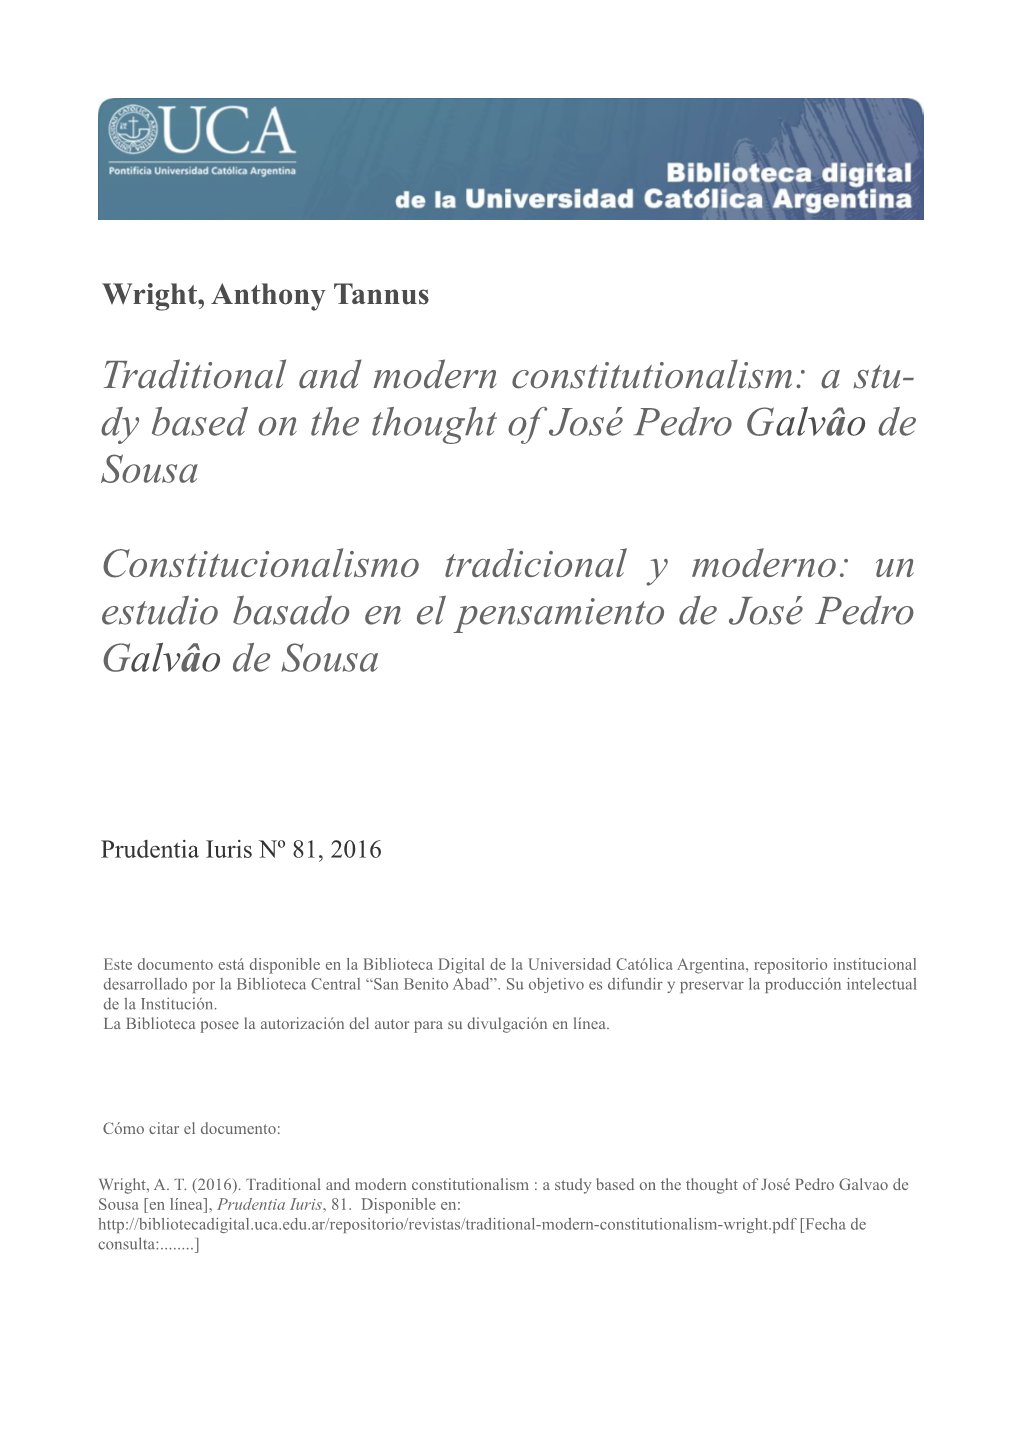 Traditional and Modern Constitutionalism: a Stu- Dy Based on the Thought of José Pedro Galvâo De Sousa